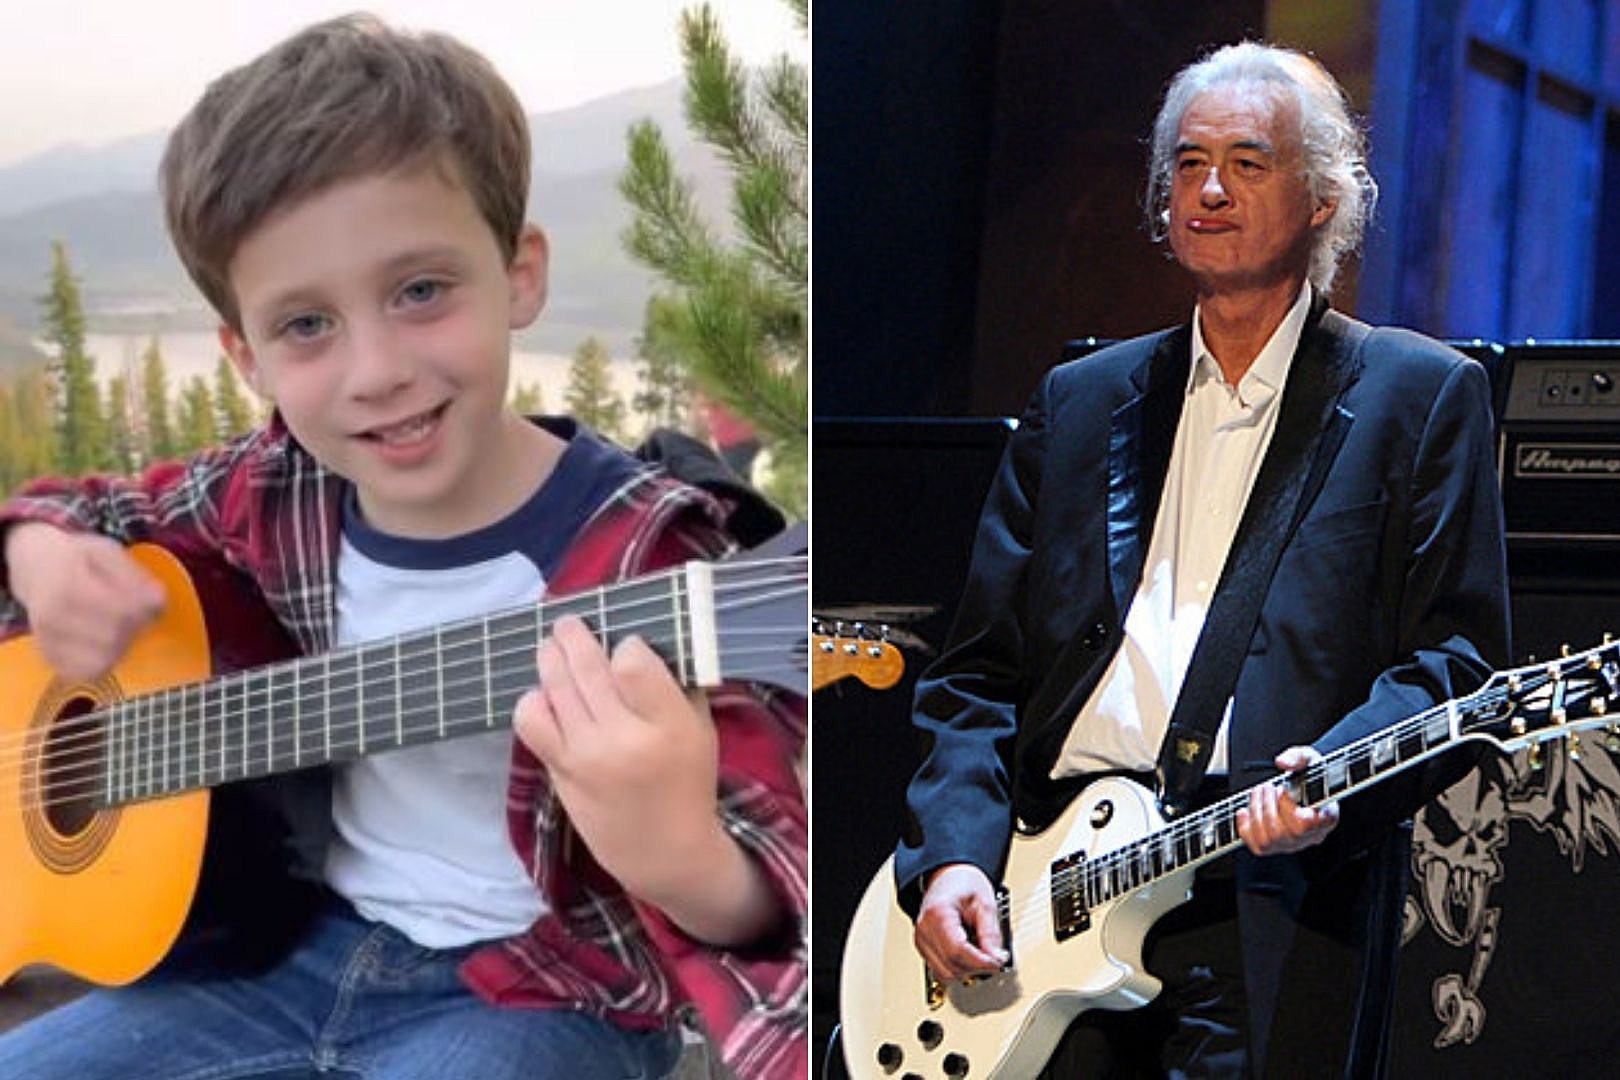 5-Year-Old Figures Out How to Play 'Stairway to Heaven' By Ear